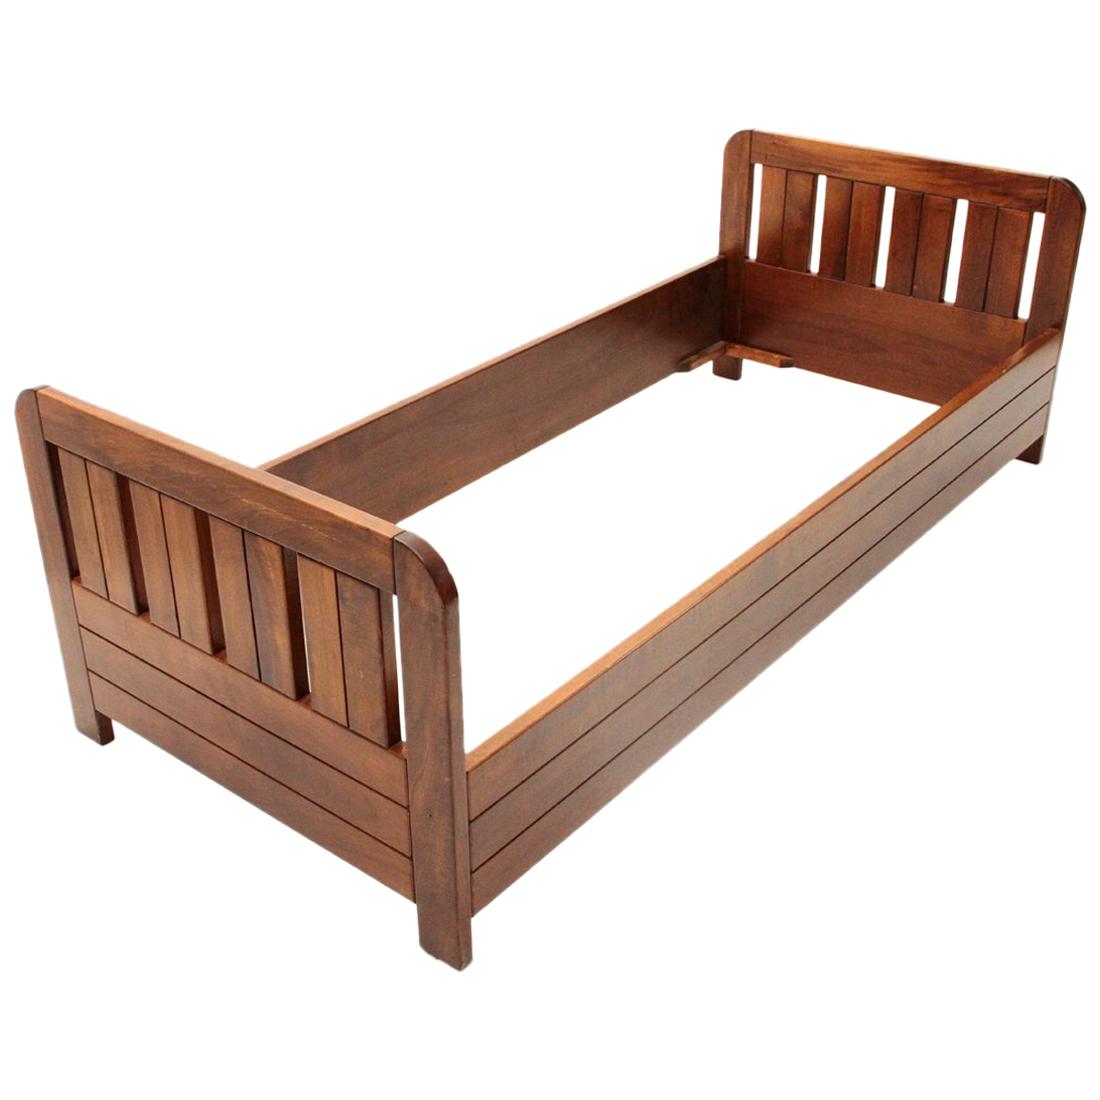 Italian Midcentury Wooden Single Bed, 1960s For Sale